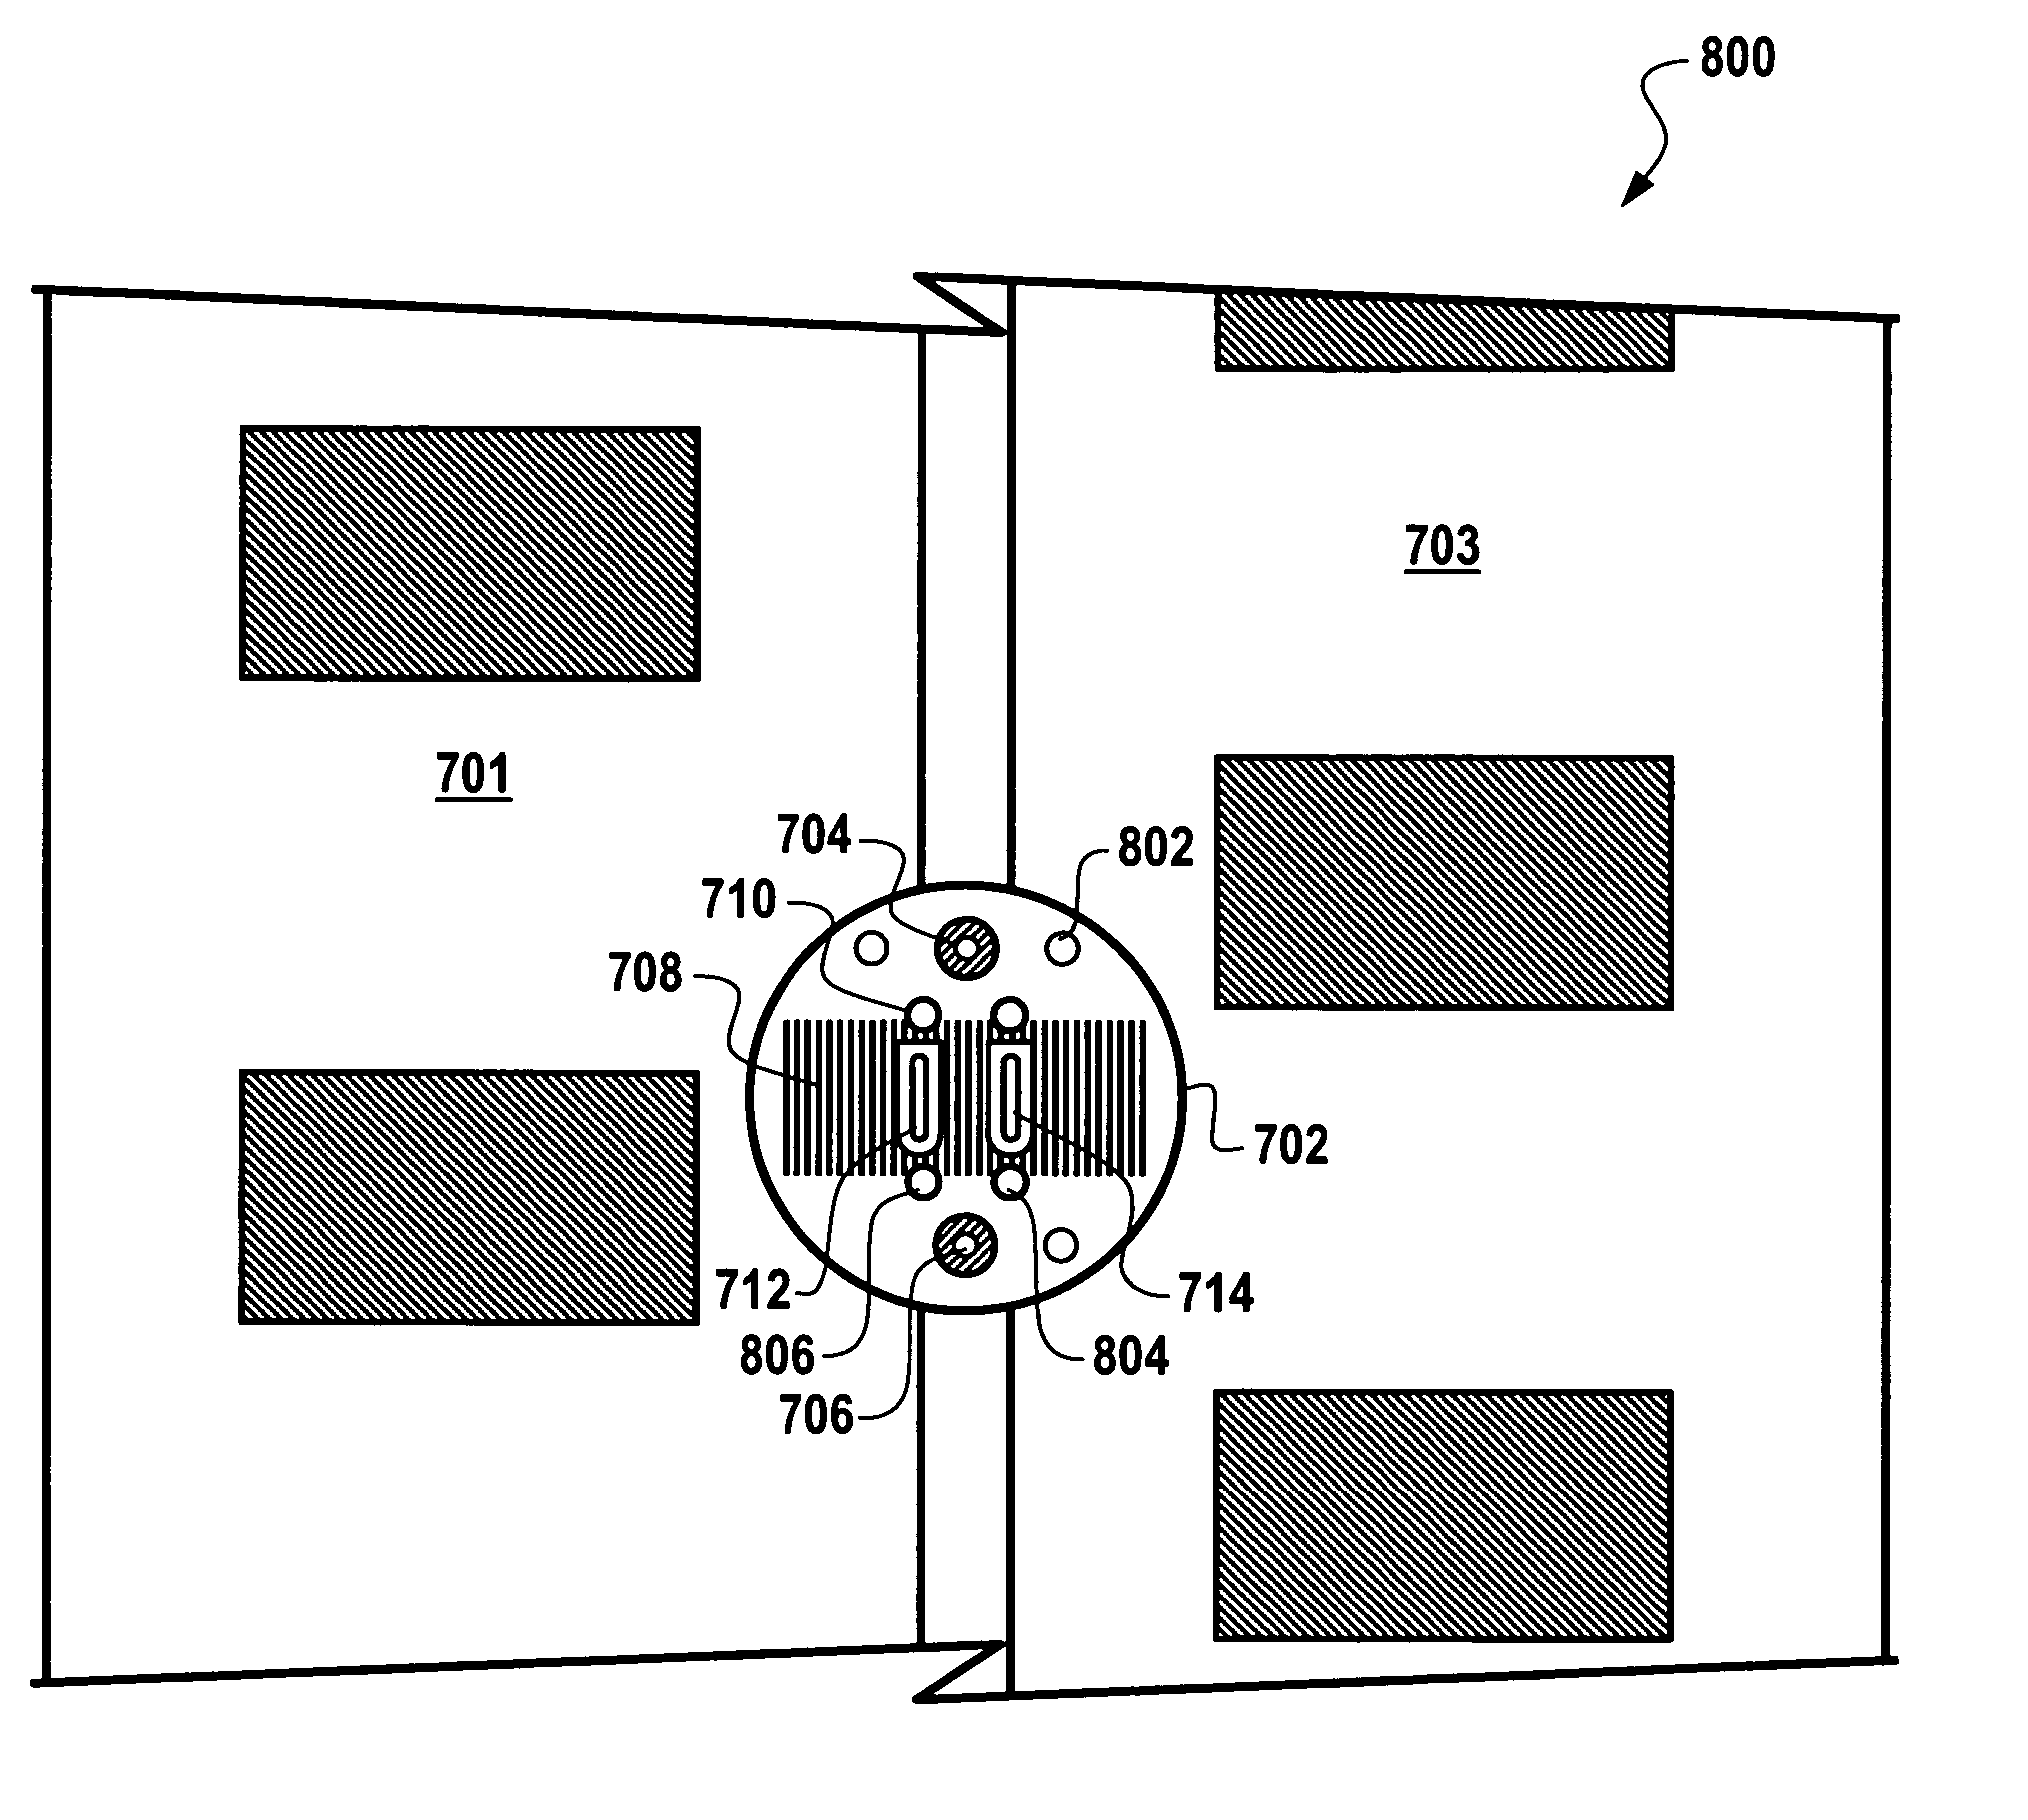 Method of making a surface acoustic wave device